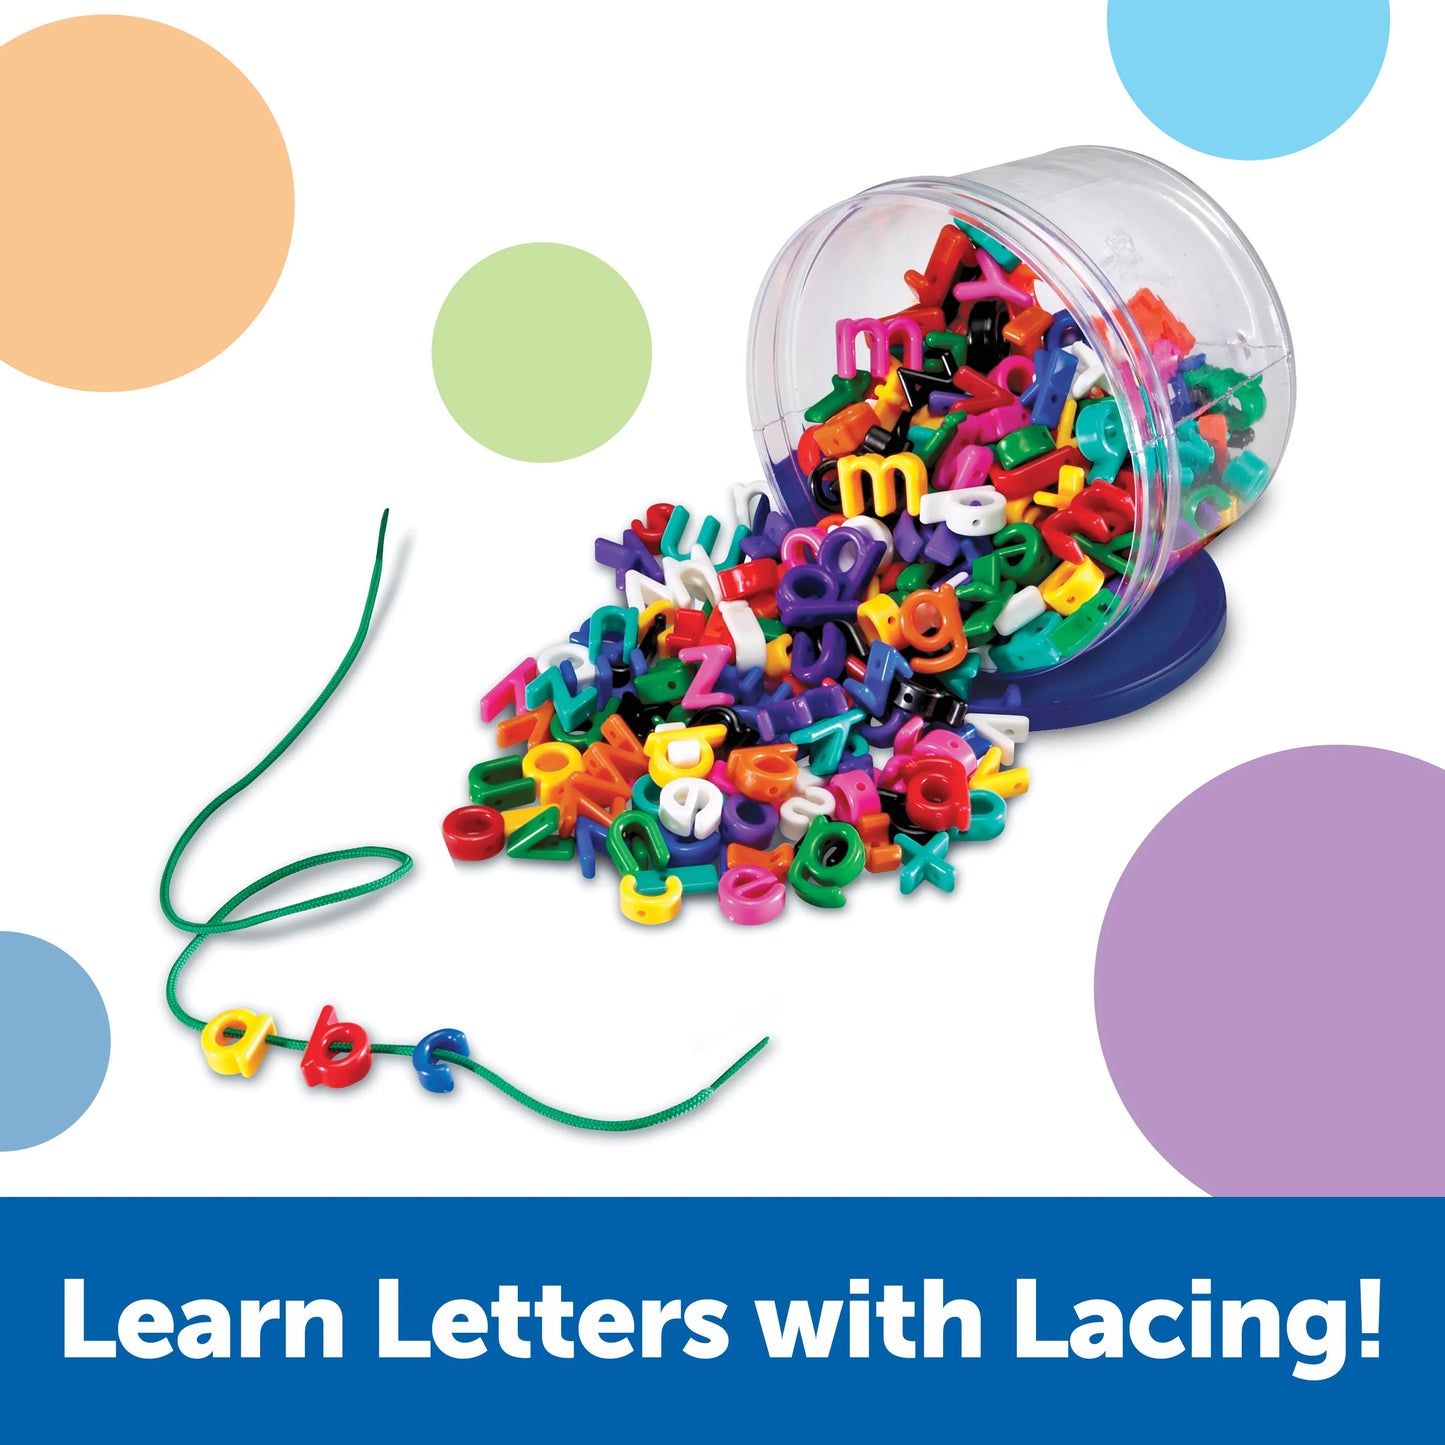 Learning Resources Lowercase Lacing Alphabet